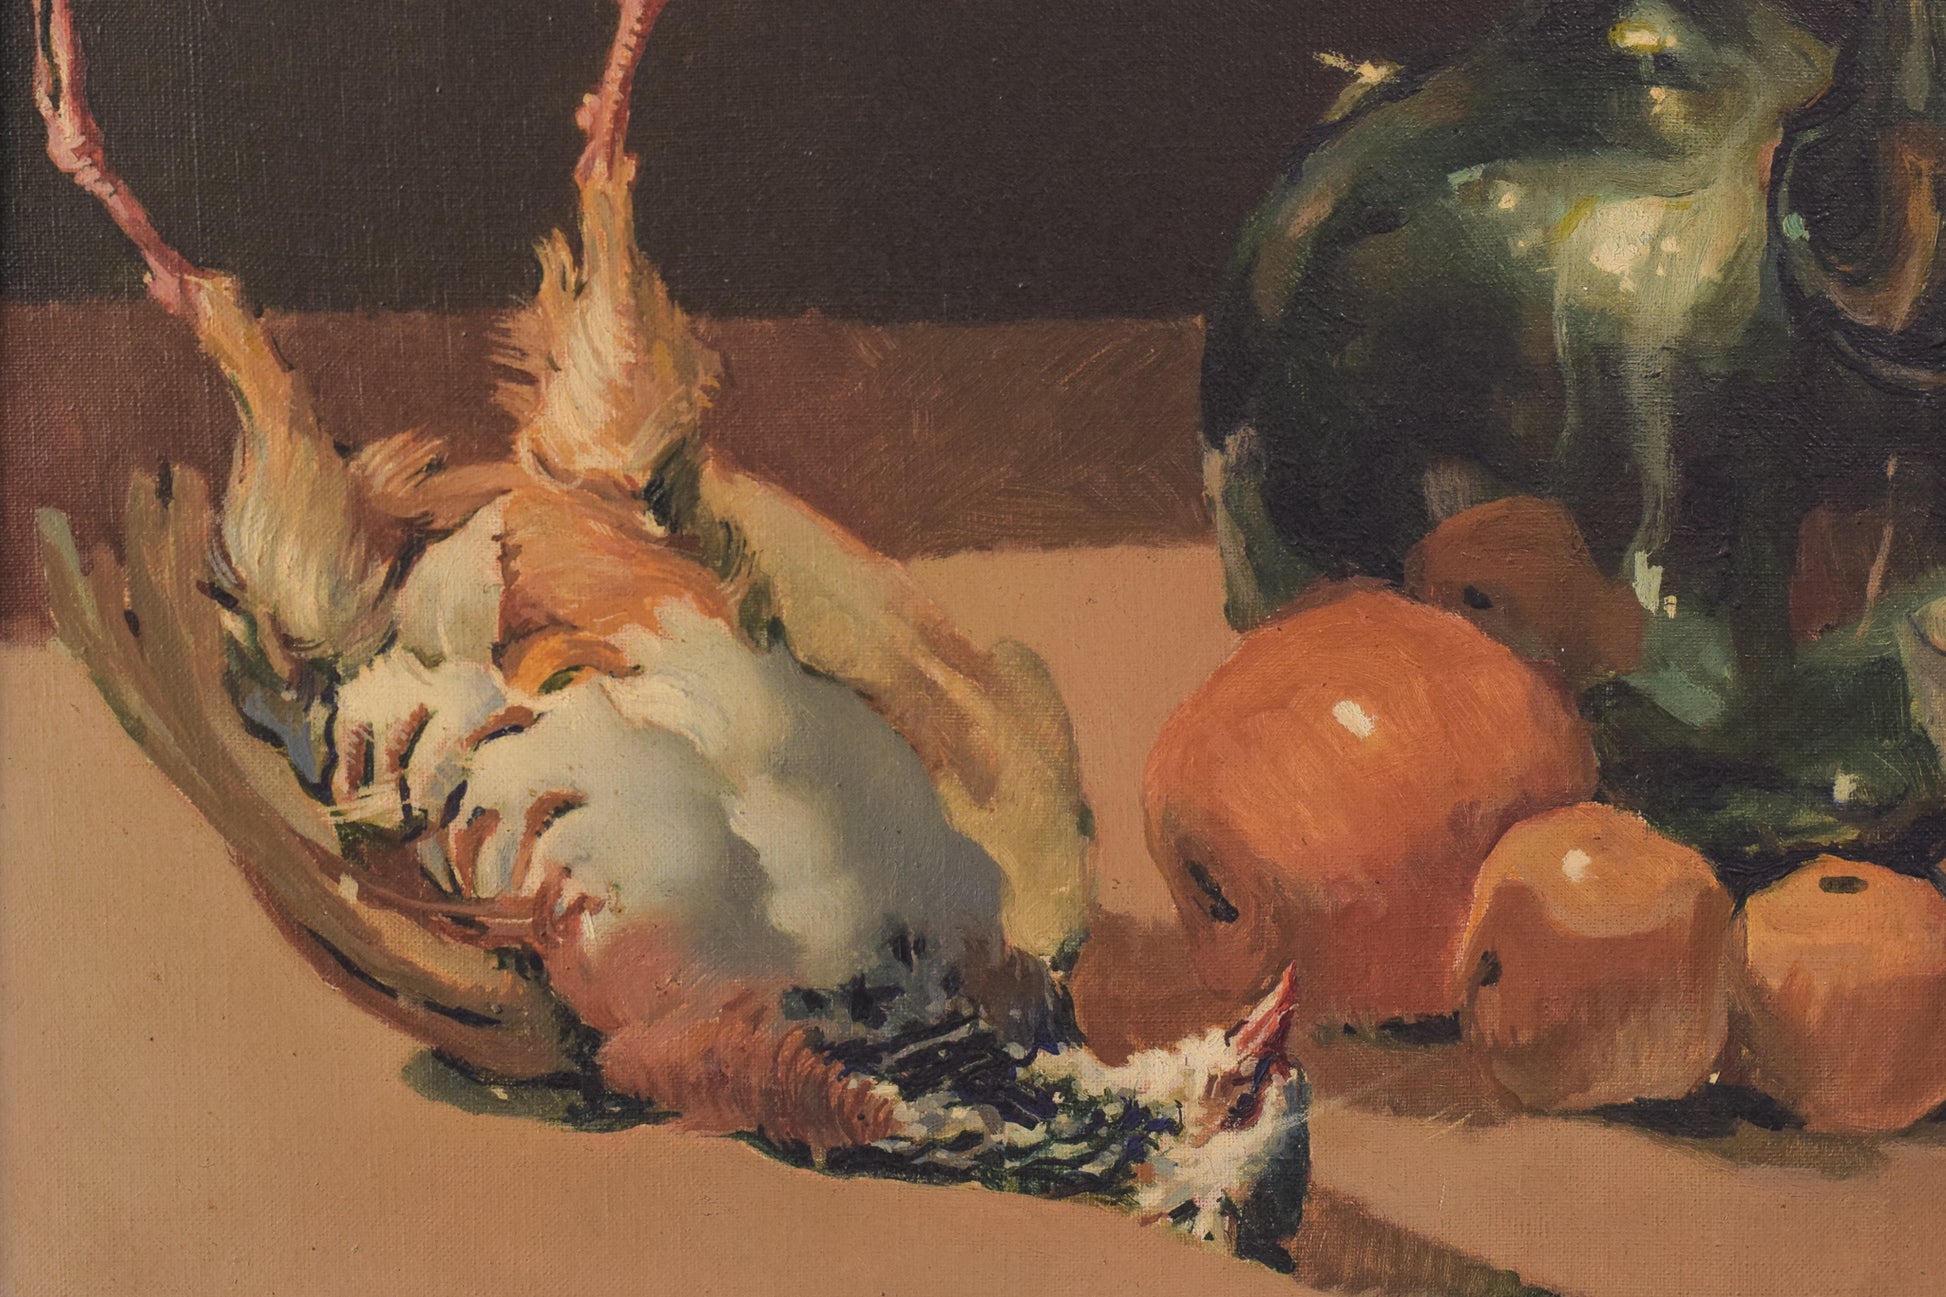 Still Life with Jug and Oranges